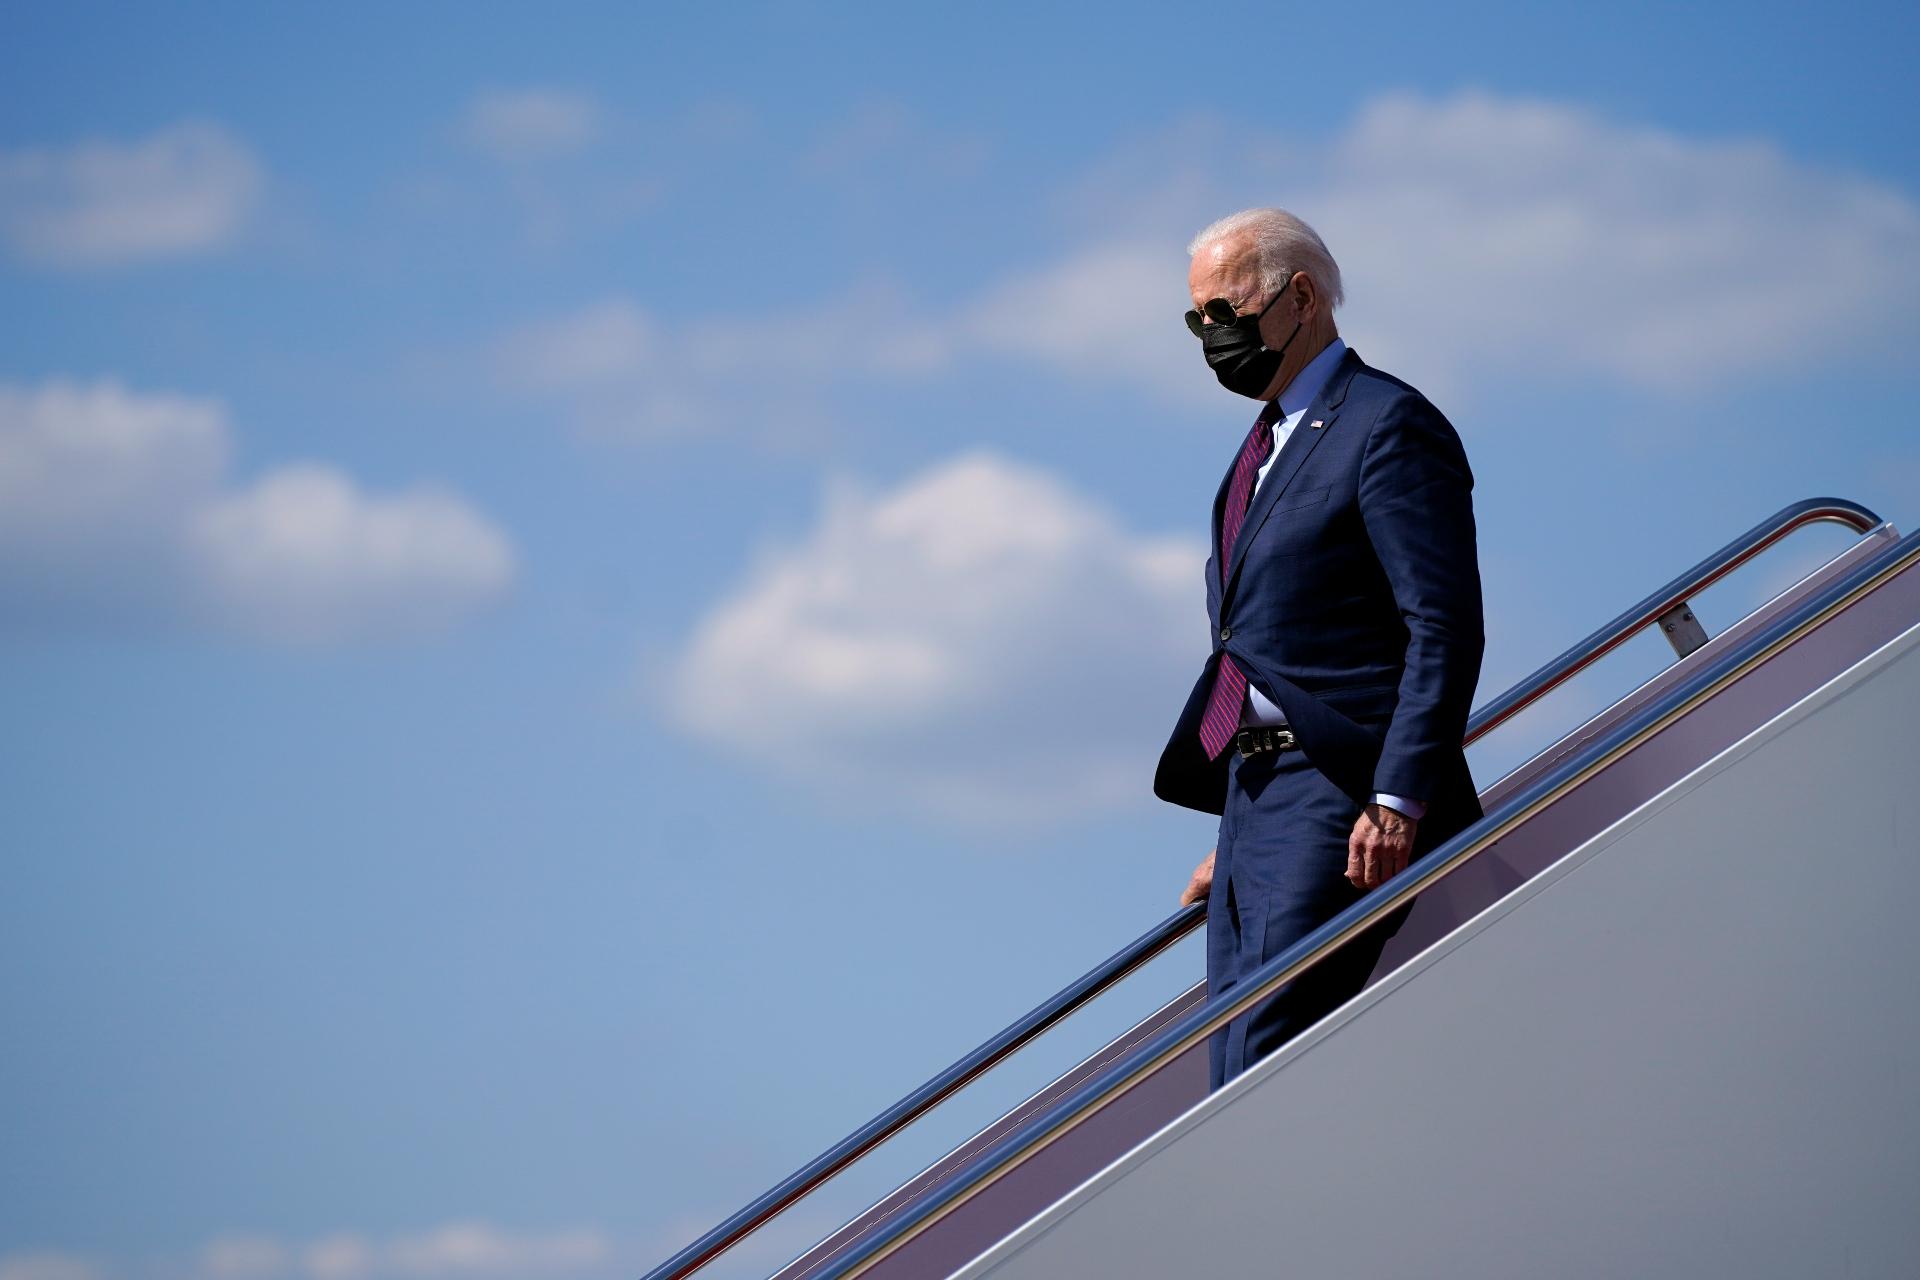 President Joe Biden arrives at Andrews Air Force Base after a trip to visit a Ford plant in Michigan, Tuesday, May 18, 2021, in Andrews Air Force Base, Md. (AP Photo / Evan Vucci)